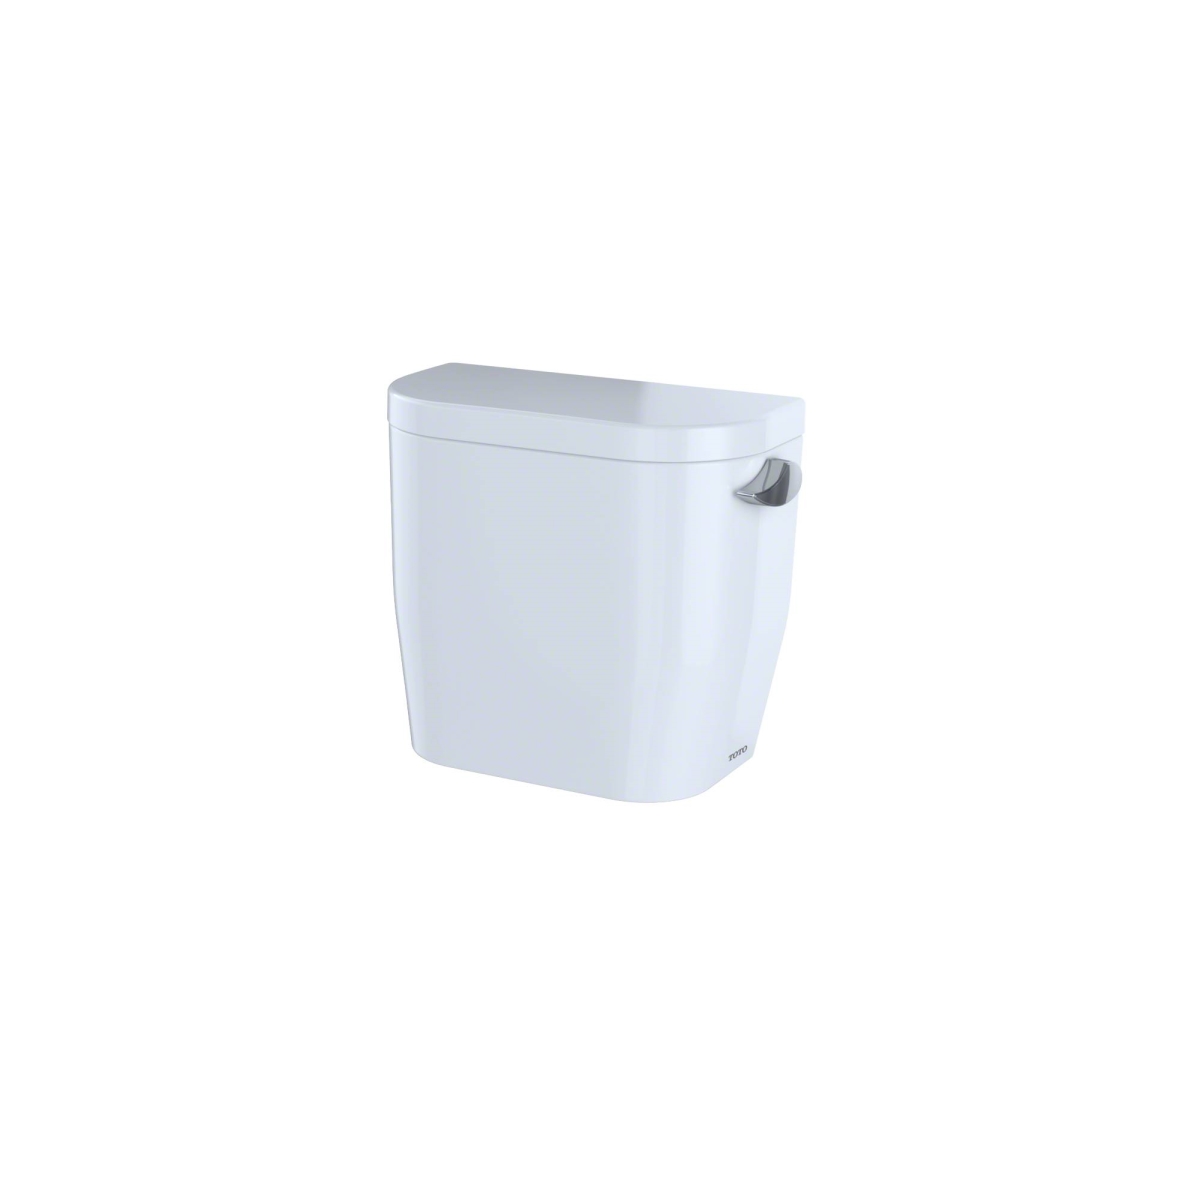 St243er-01 Entrada E-max 1.28 Gpf Toilet Tank With Right-hand Trip Lever